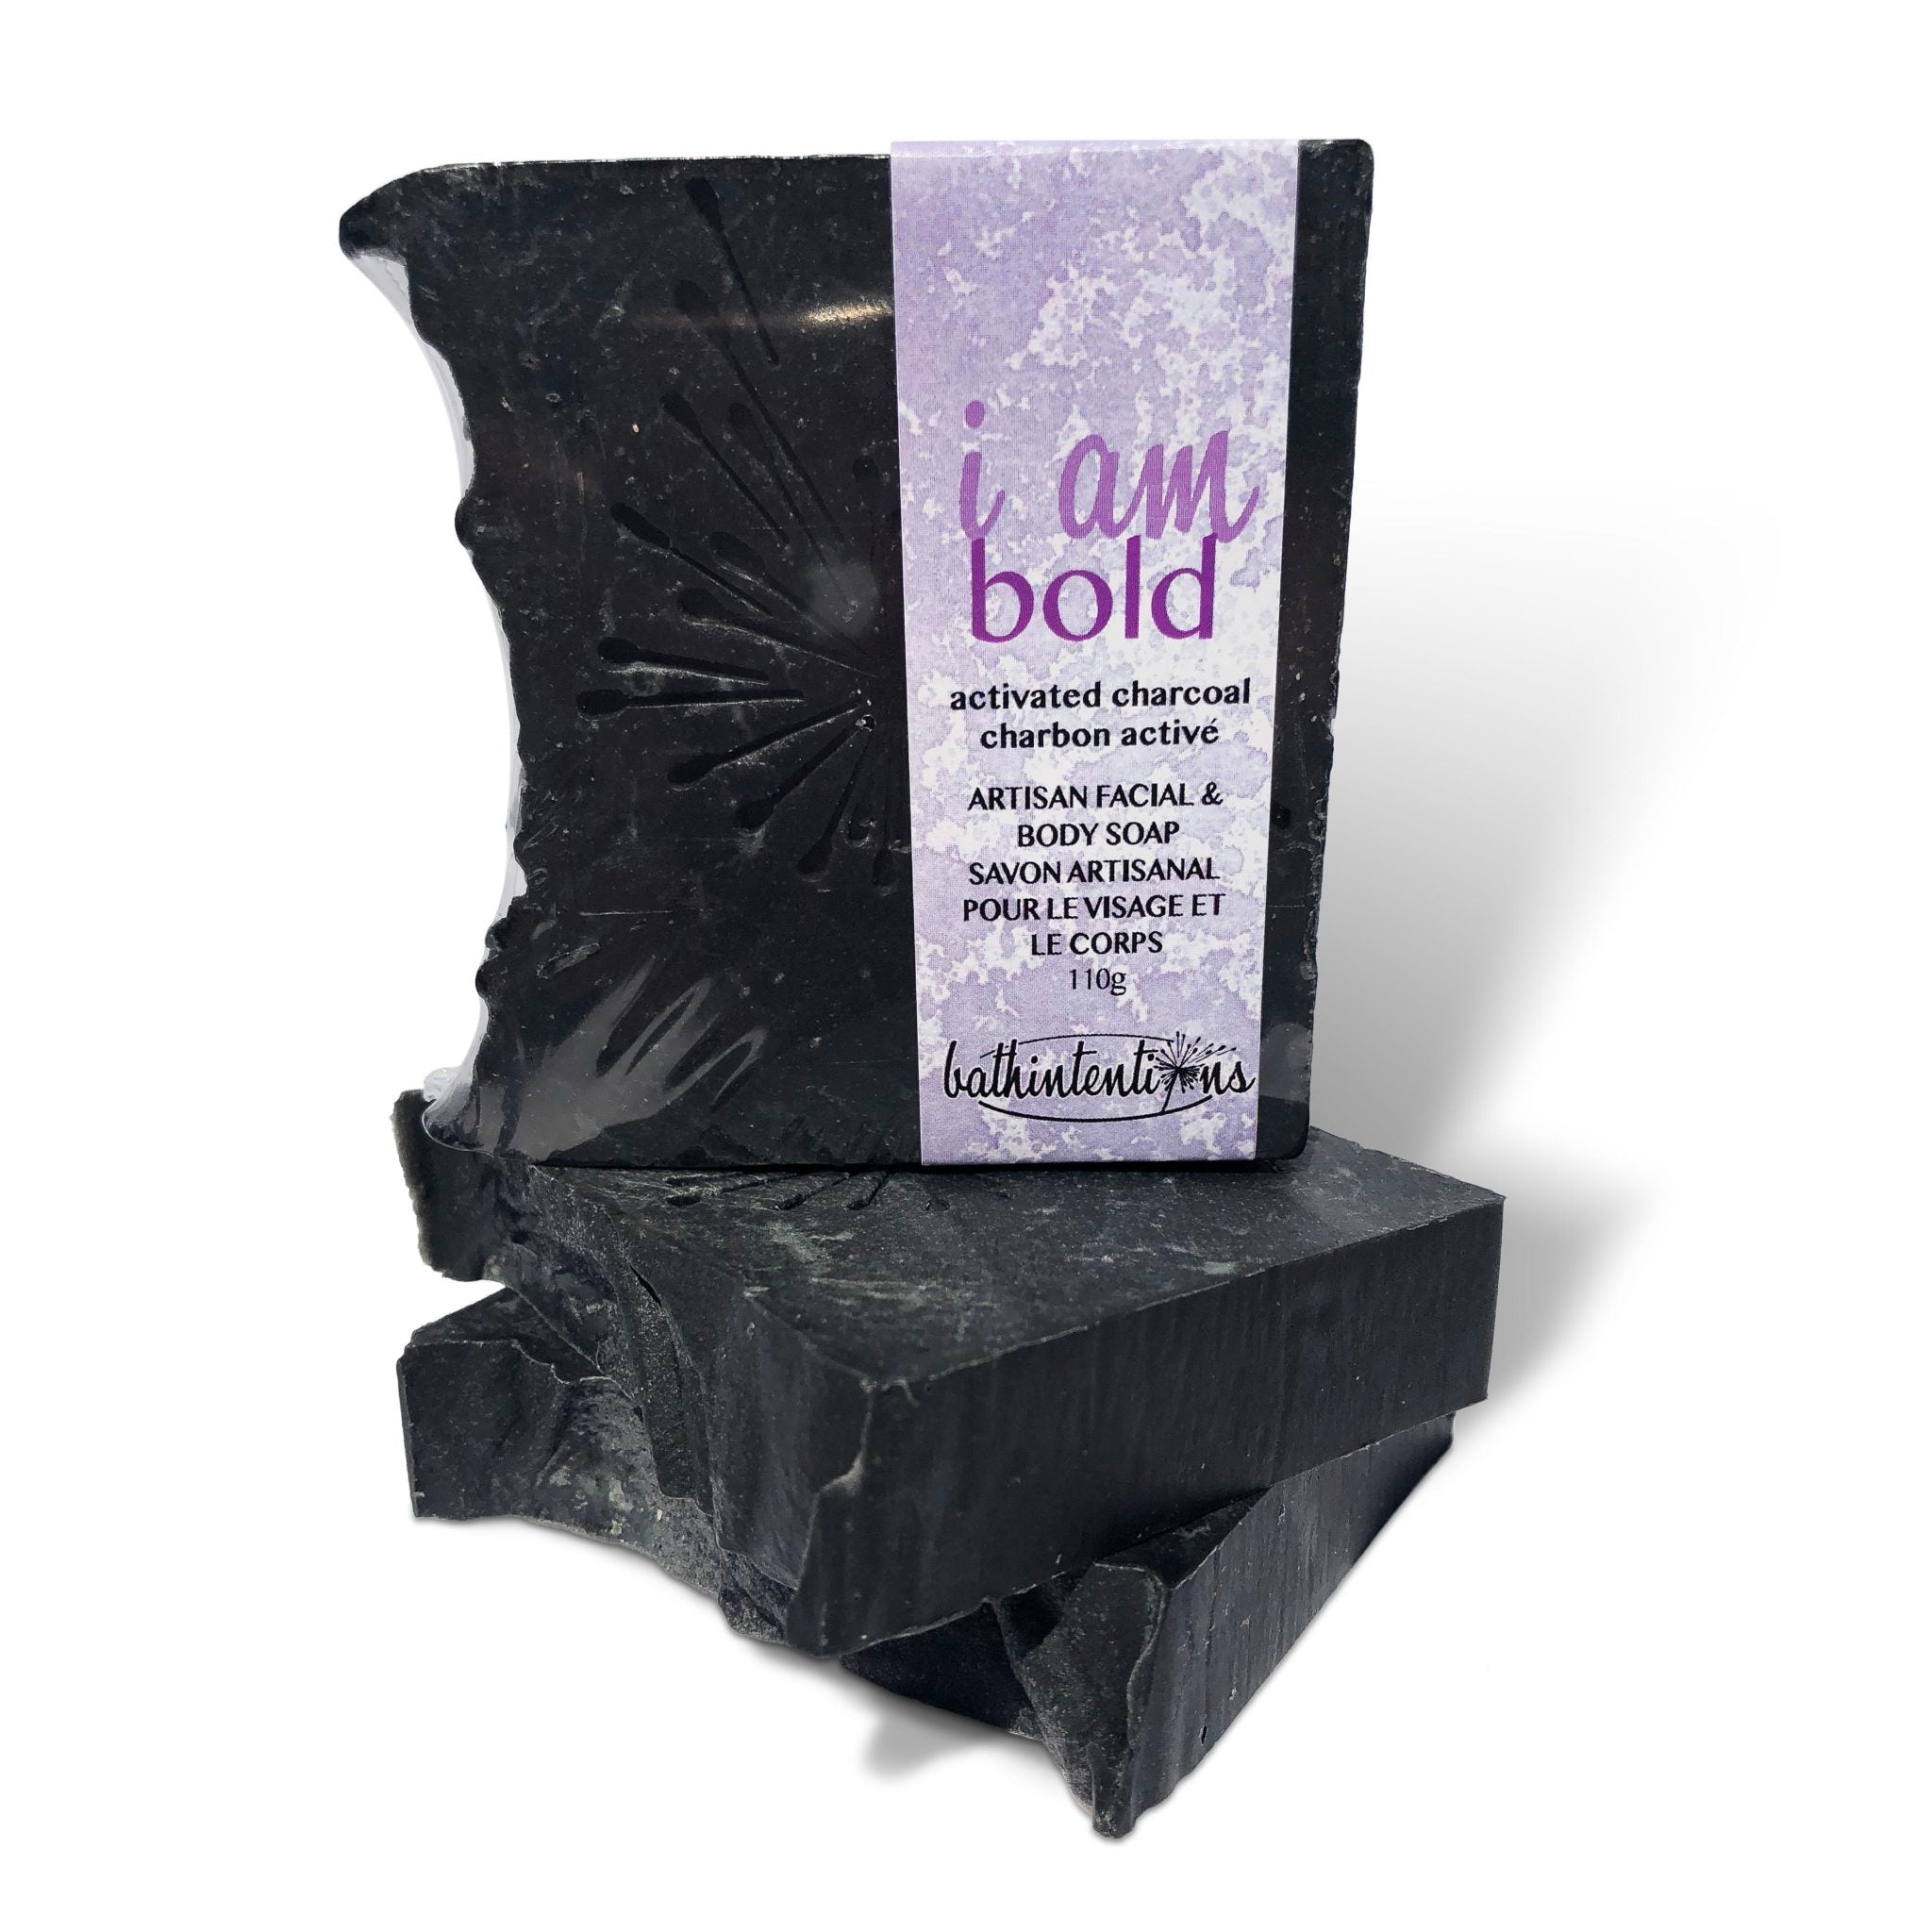 i am bold | artisan facial & body soap | activated charcoal